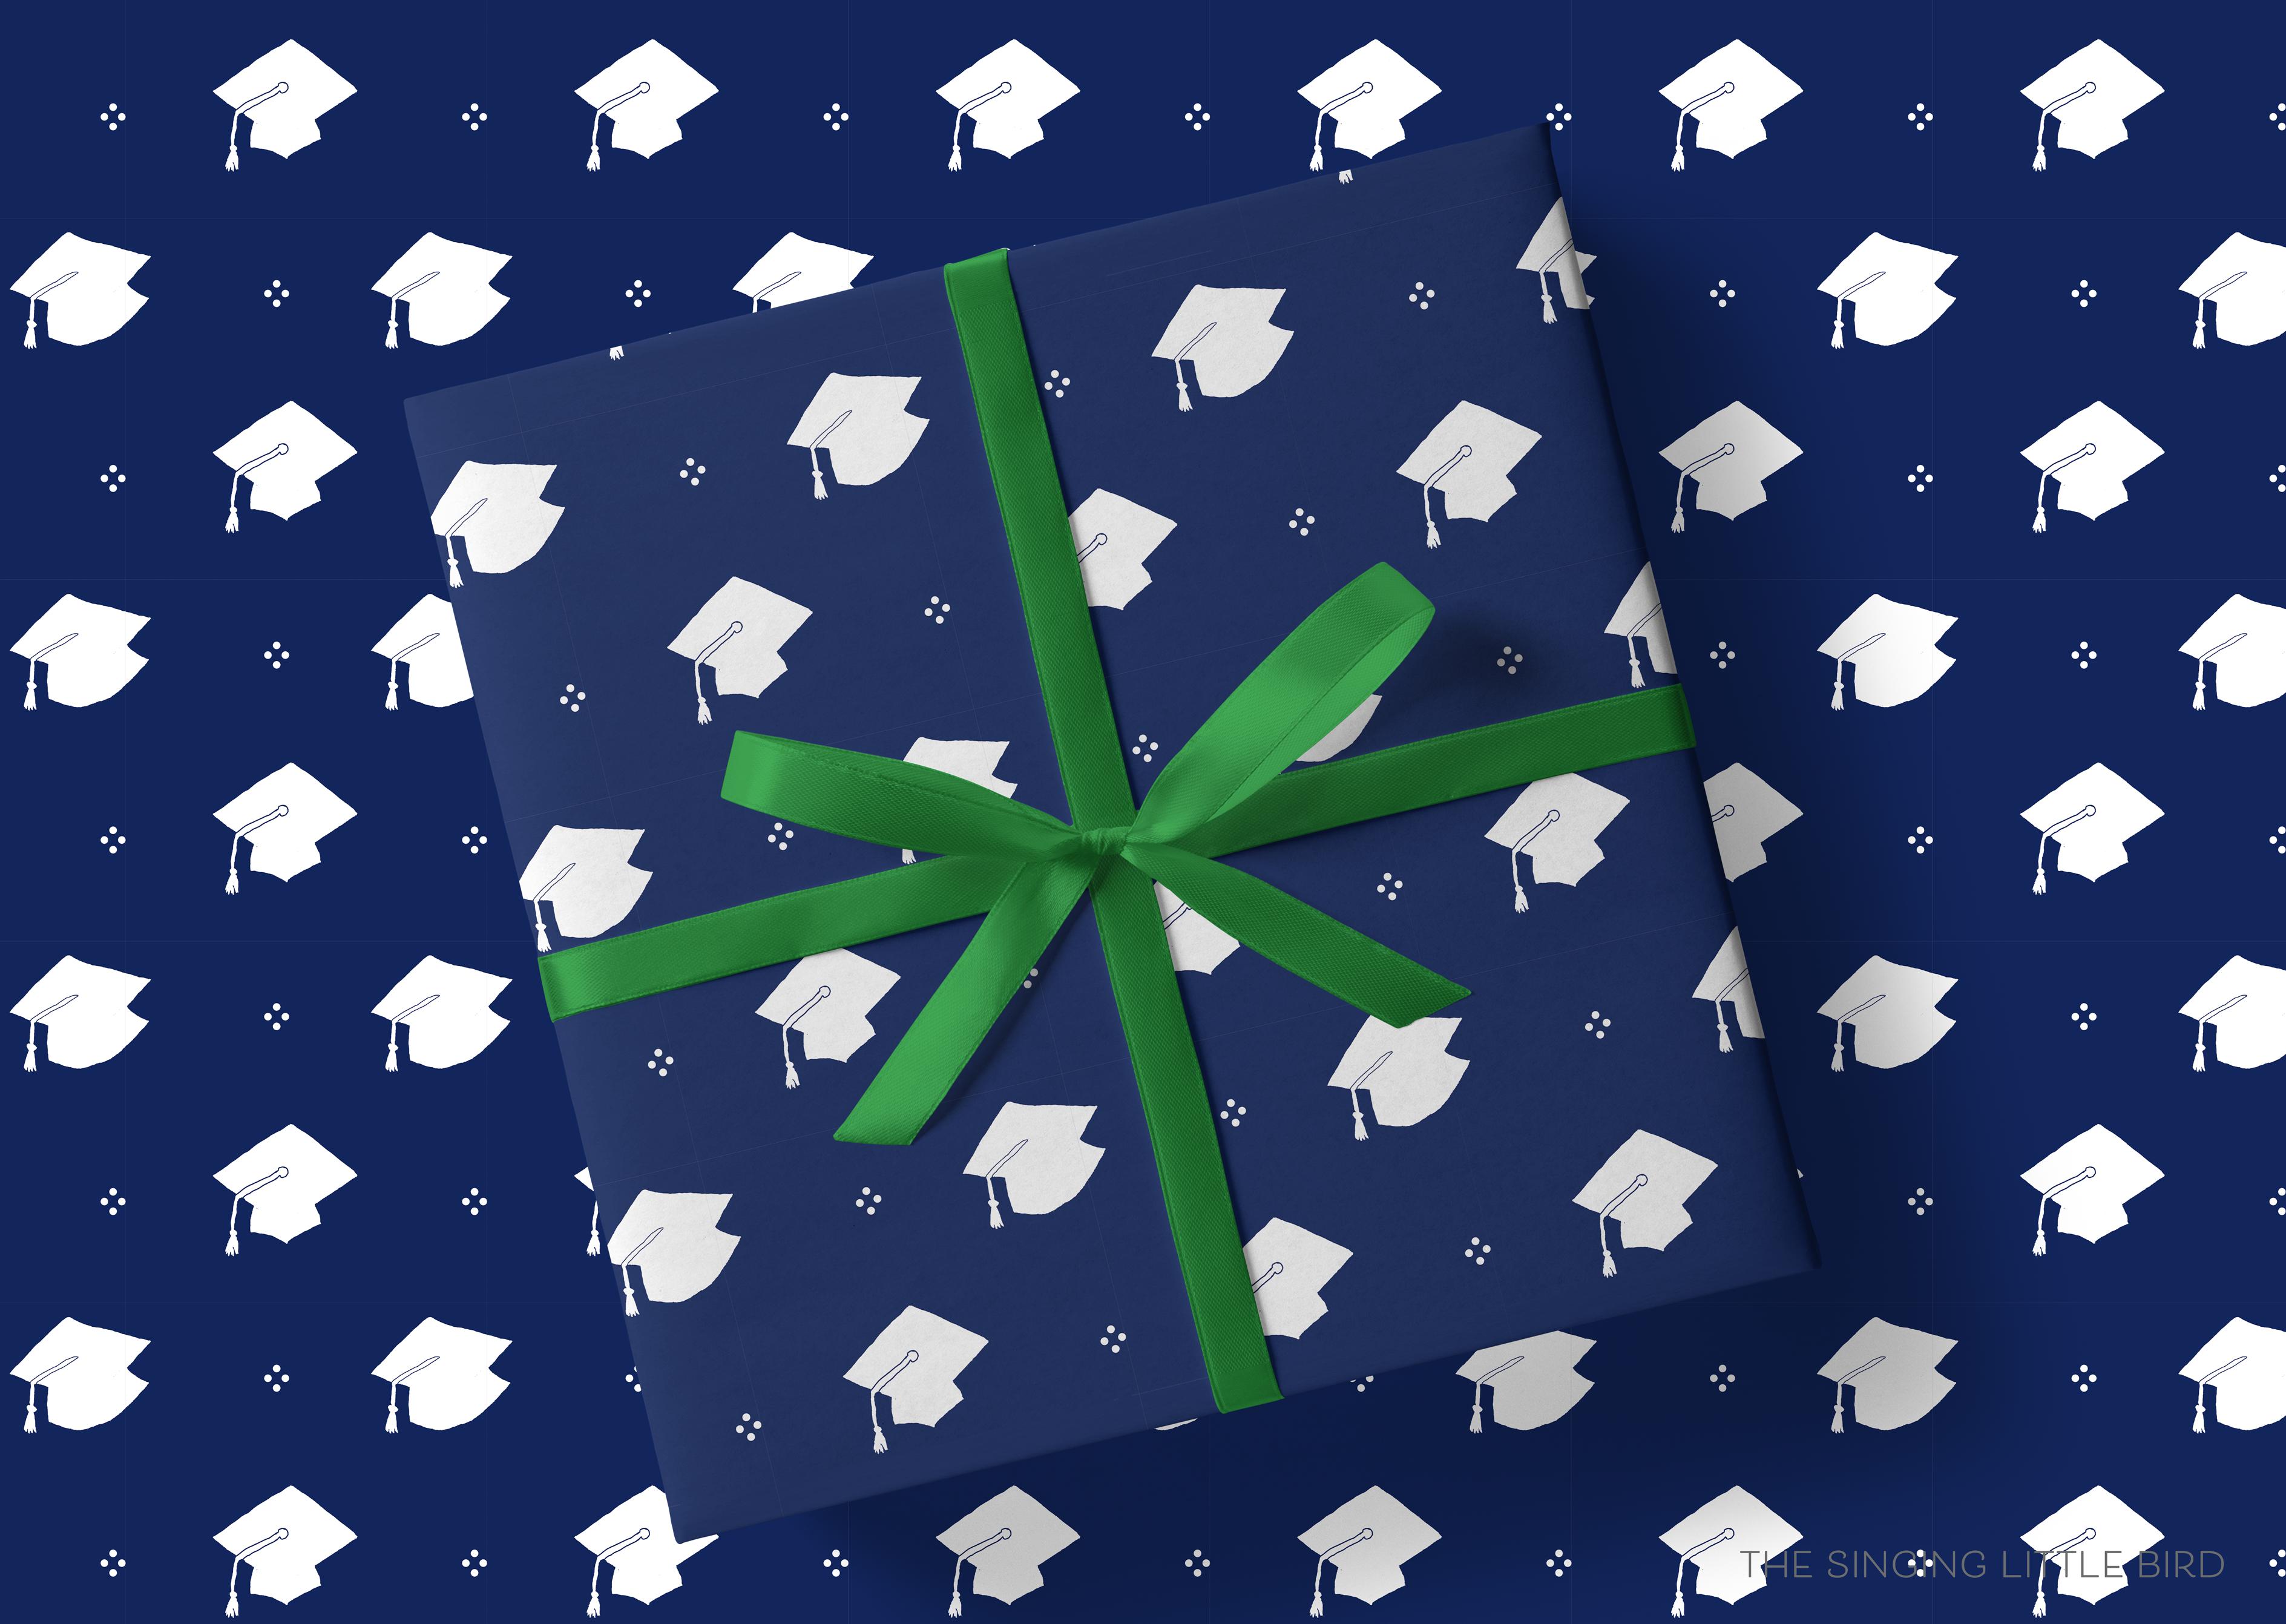 Graduation Gift Wrap-This matte finish gift wrap features our hand drawn grad caps, making a perfect wrapping paper for a high school or college graduation gift.-The Singing Little Bird